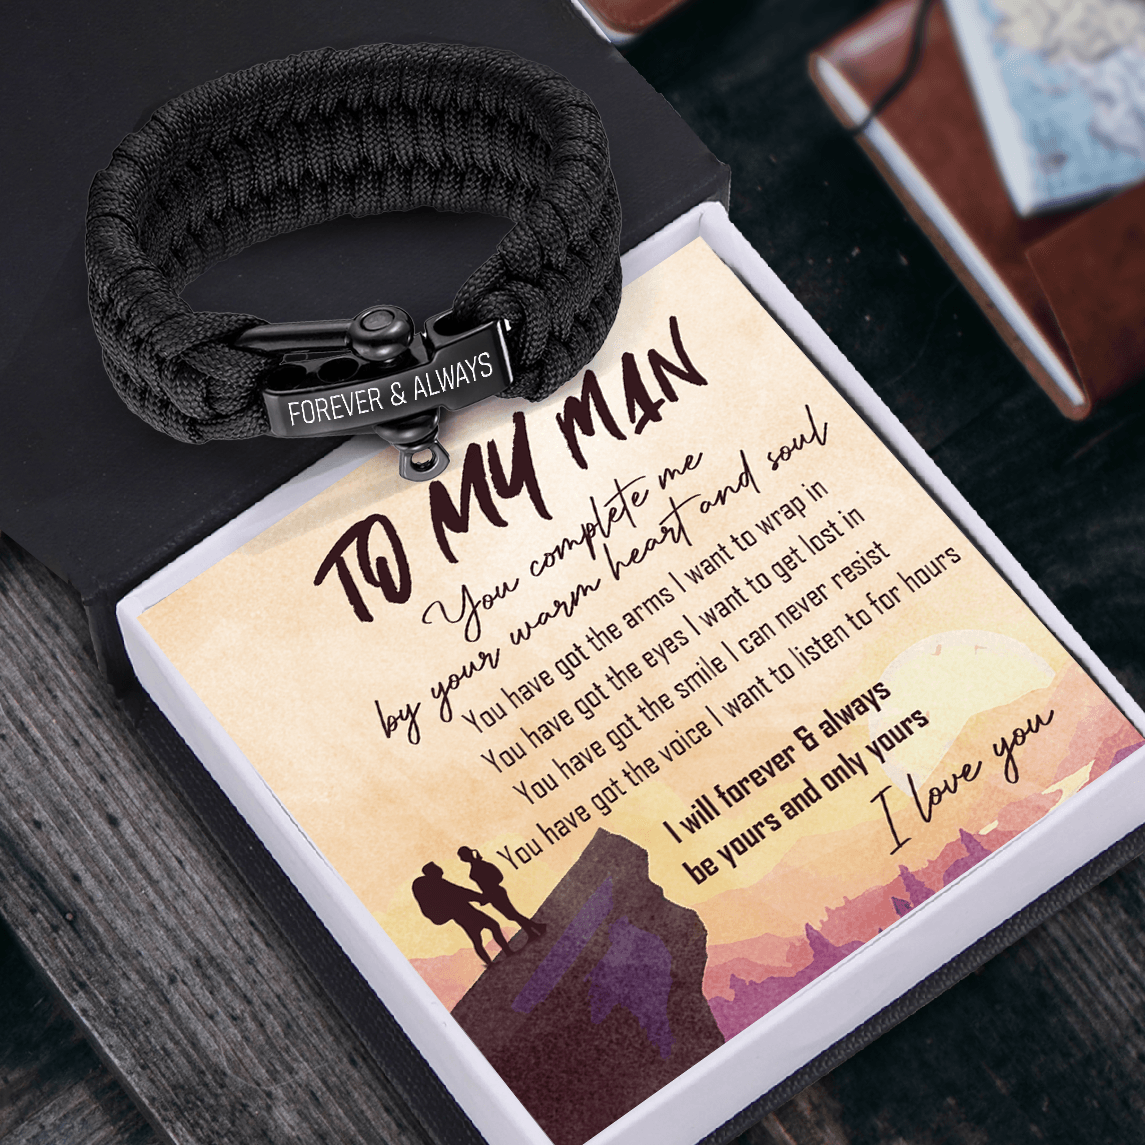 Paracord Rope Bracelet - Hiking - To My Man - You Complete Me By Your Warm Heart And Soul - Augbxa26009 - Gifts Holder